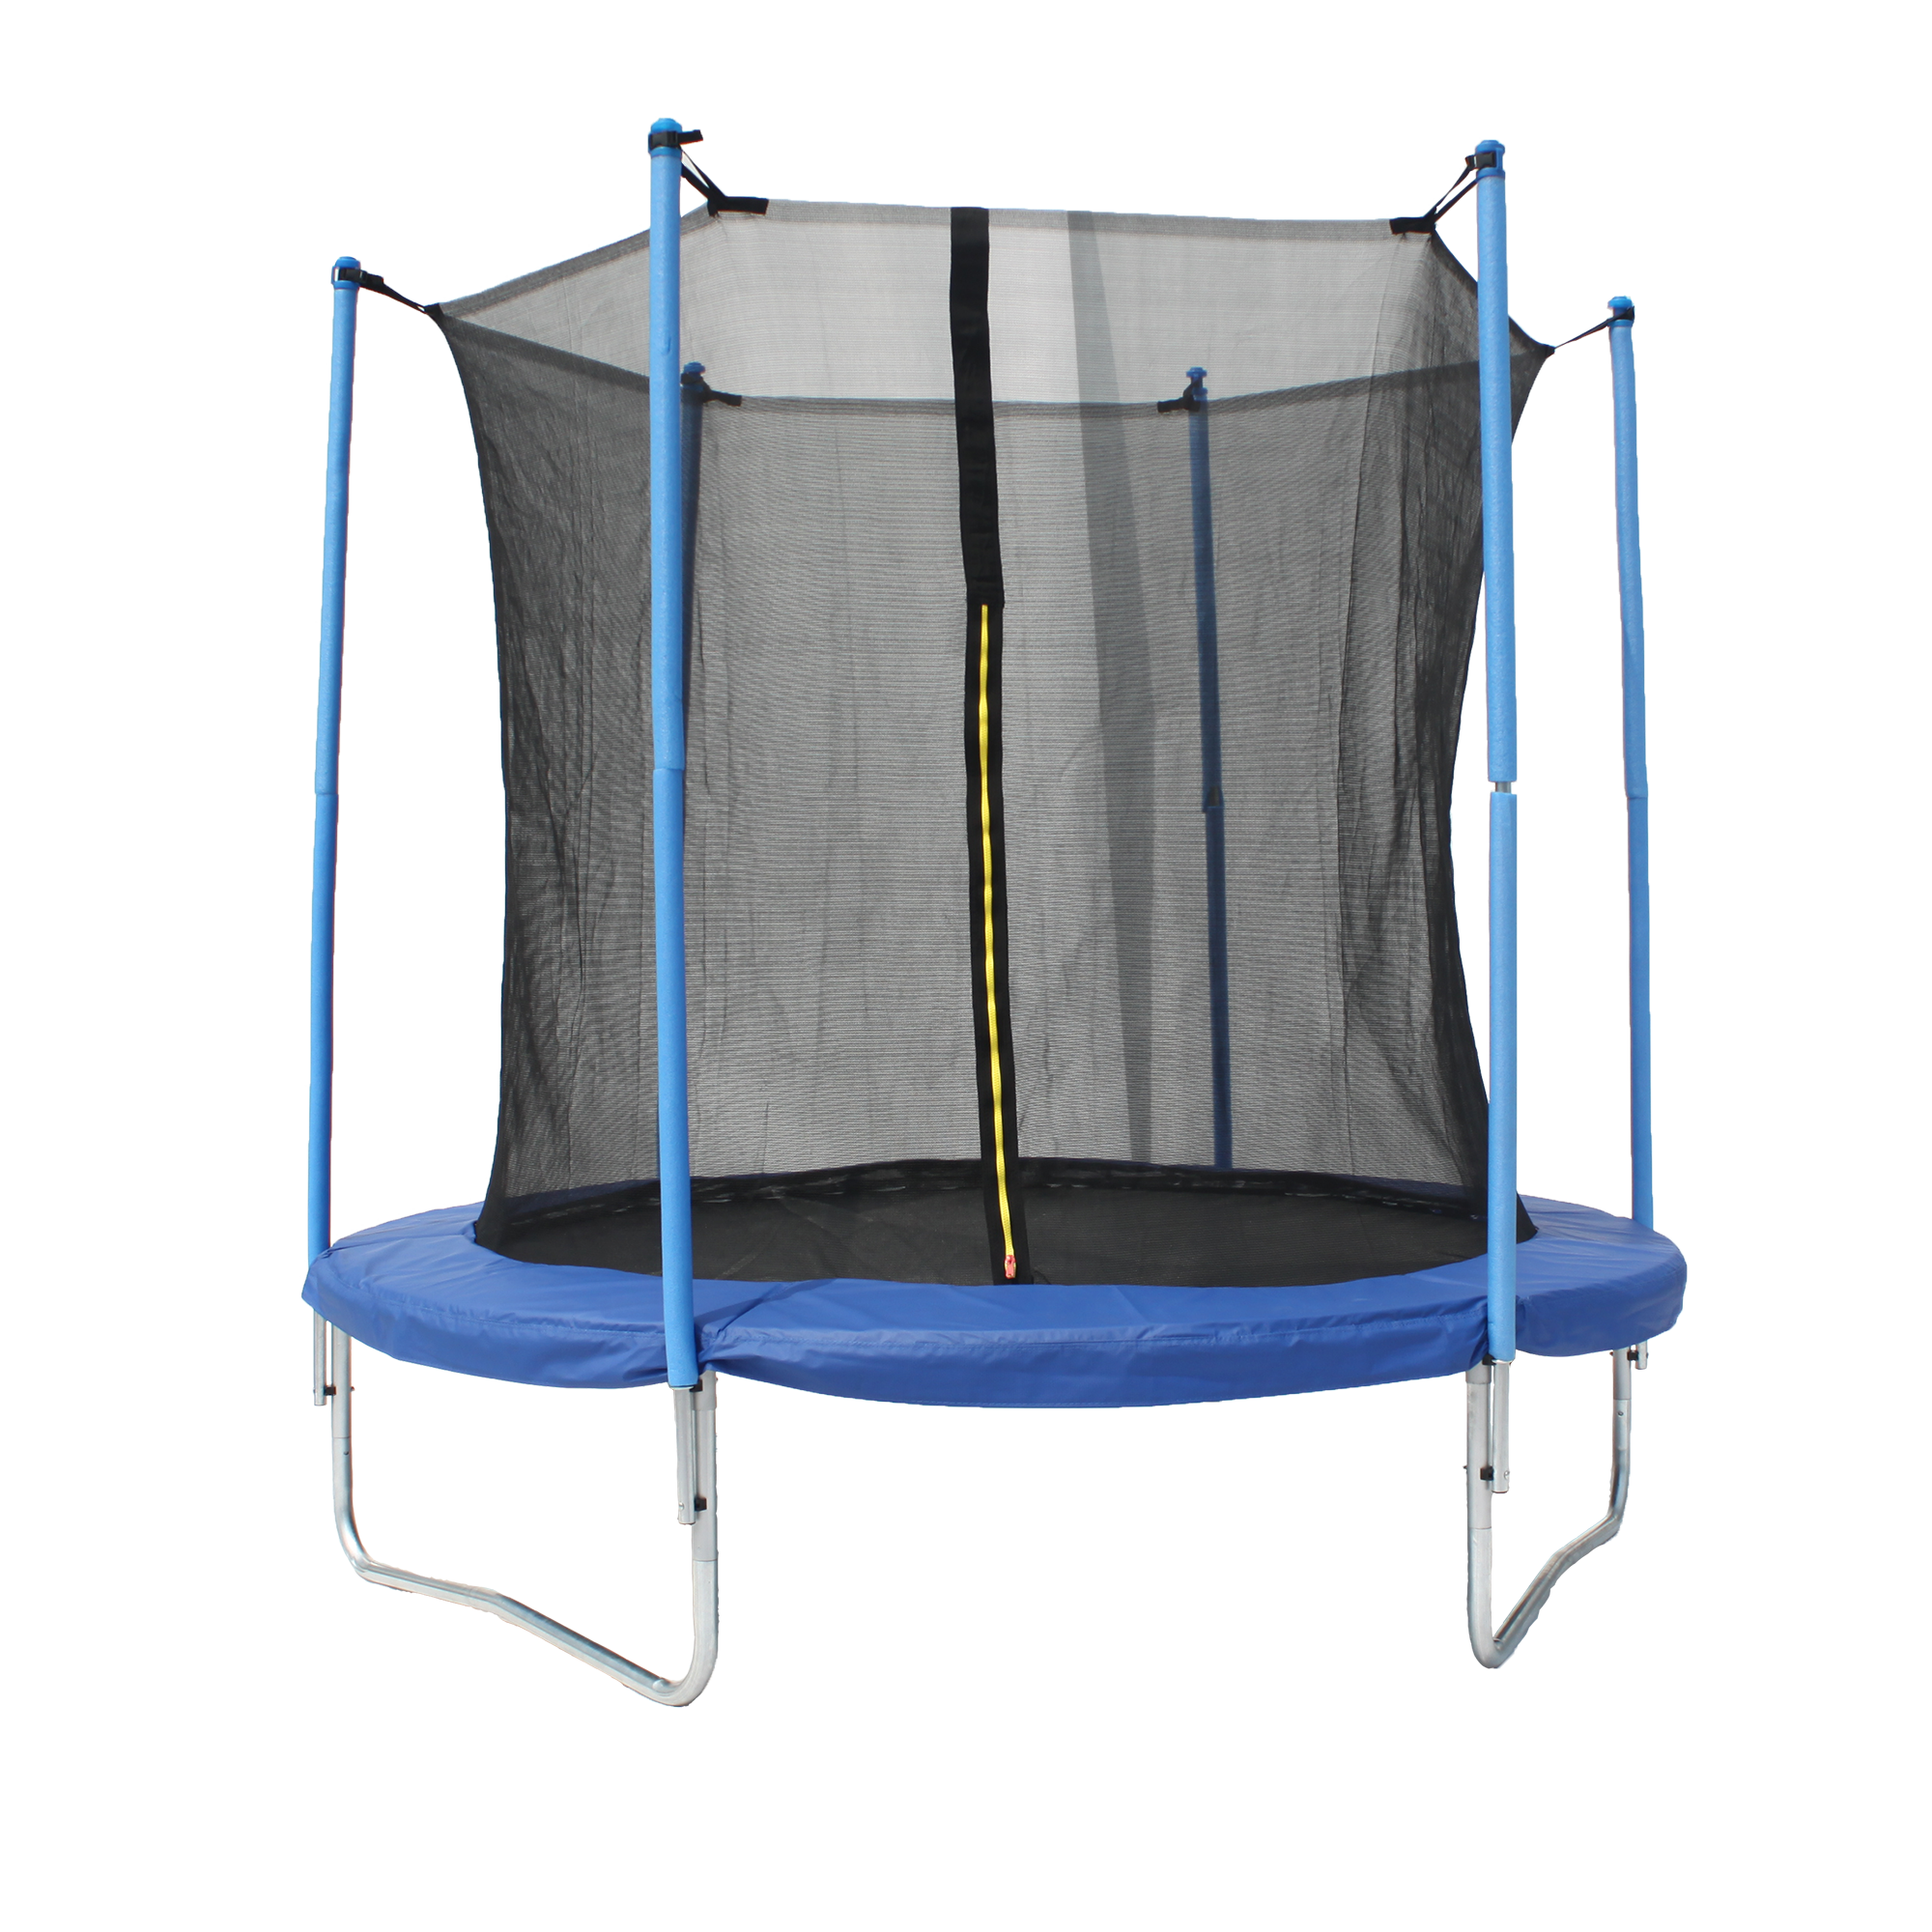 8ft trampoline with security net